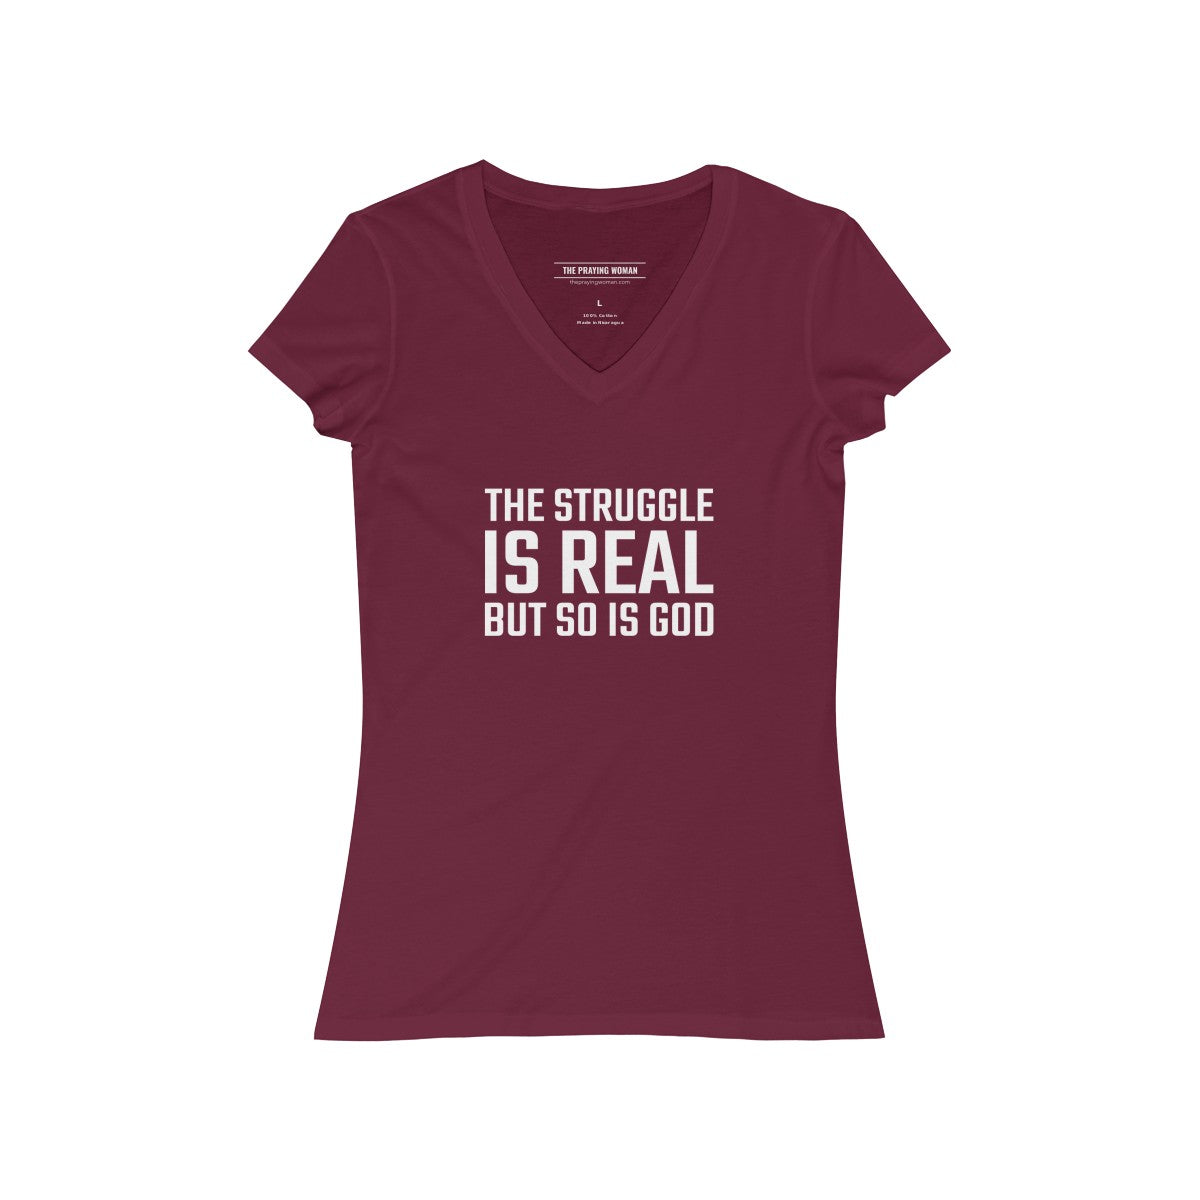 The Struggle is Real V-Neck Tee